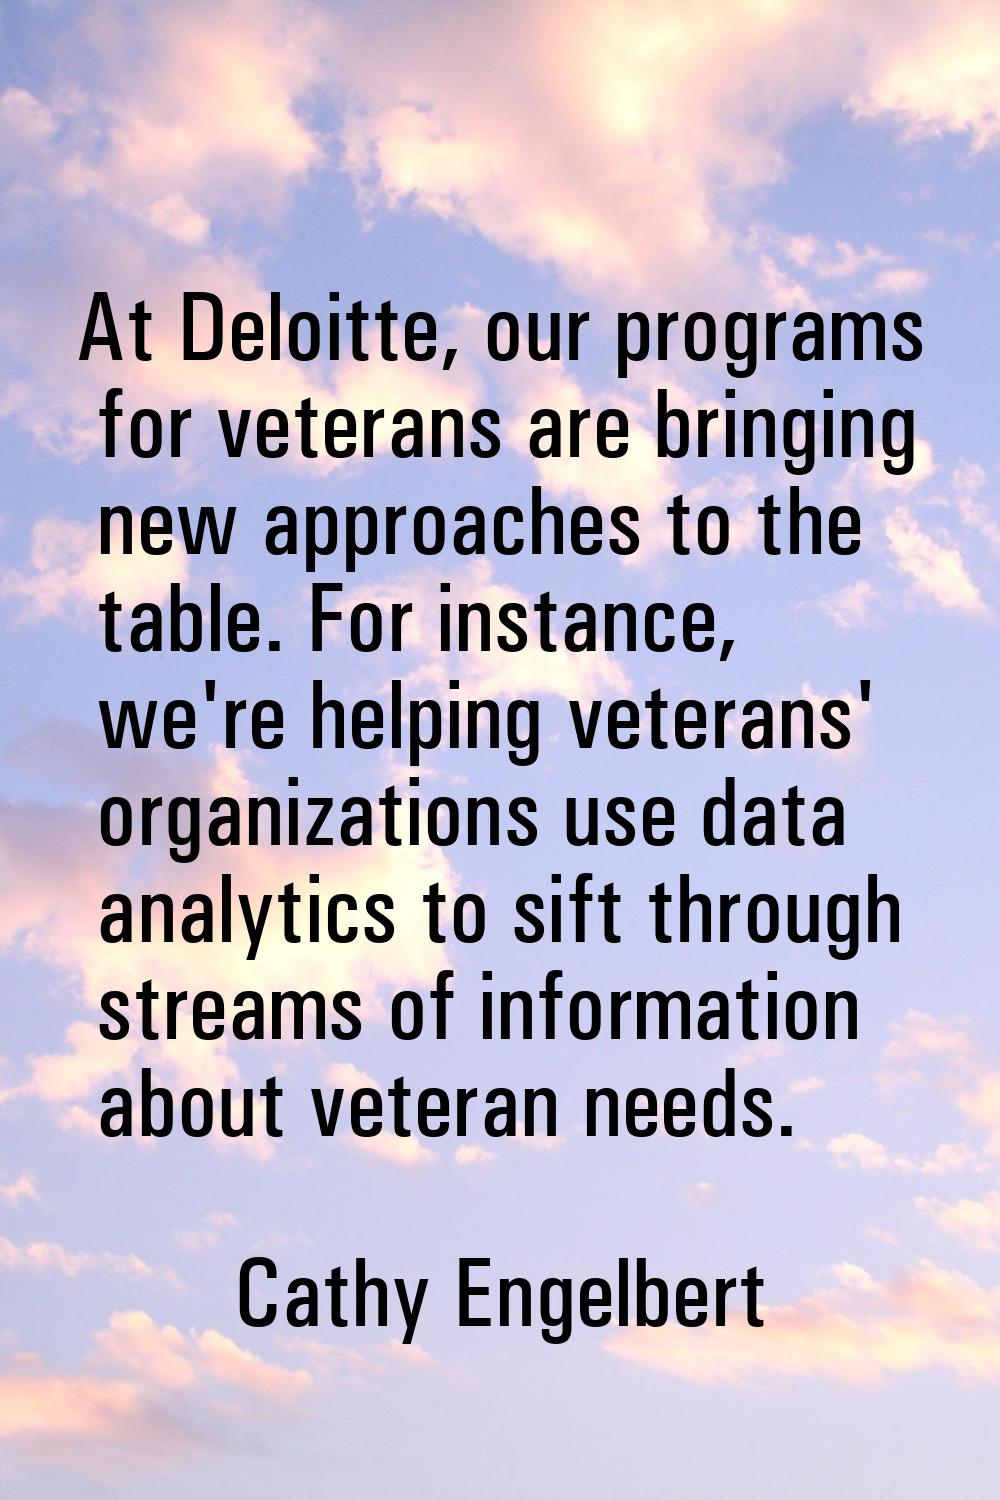 At Deloitte, our programs for veterans are bringing new approaches to the table. For instance, we'r